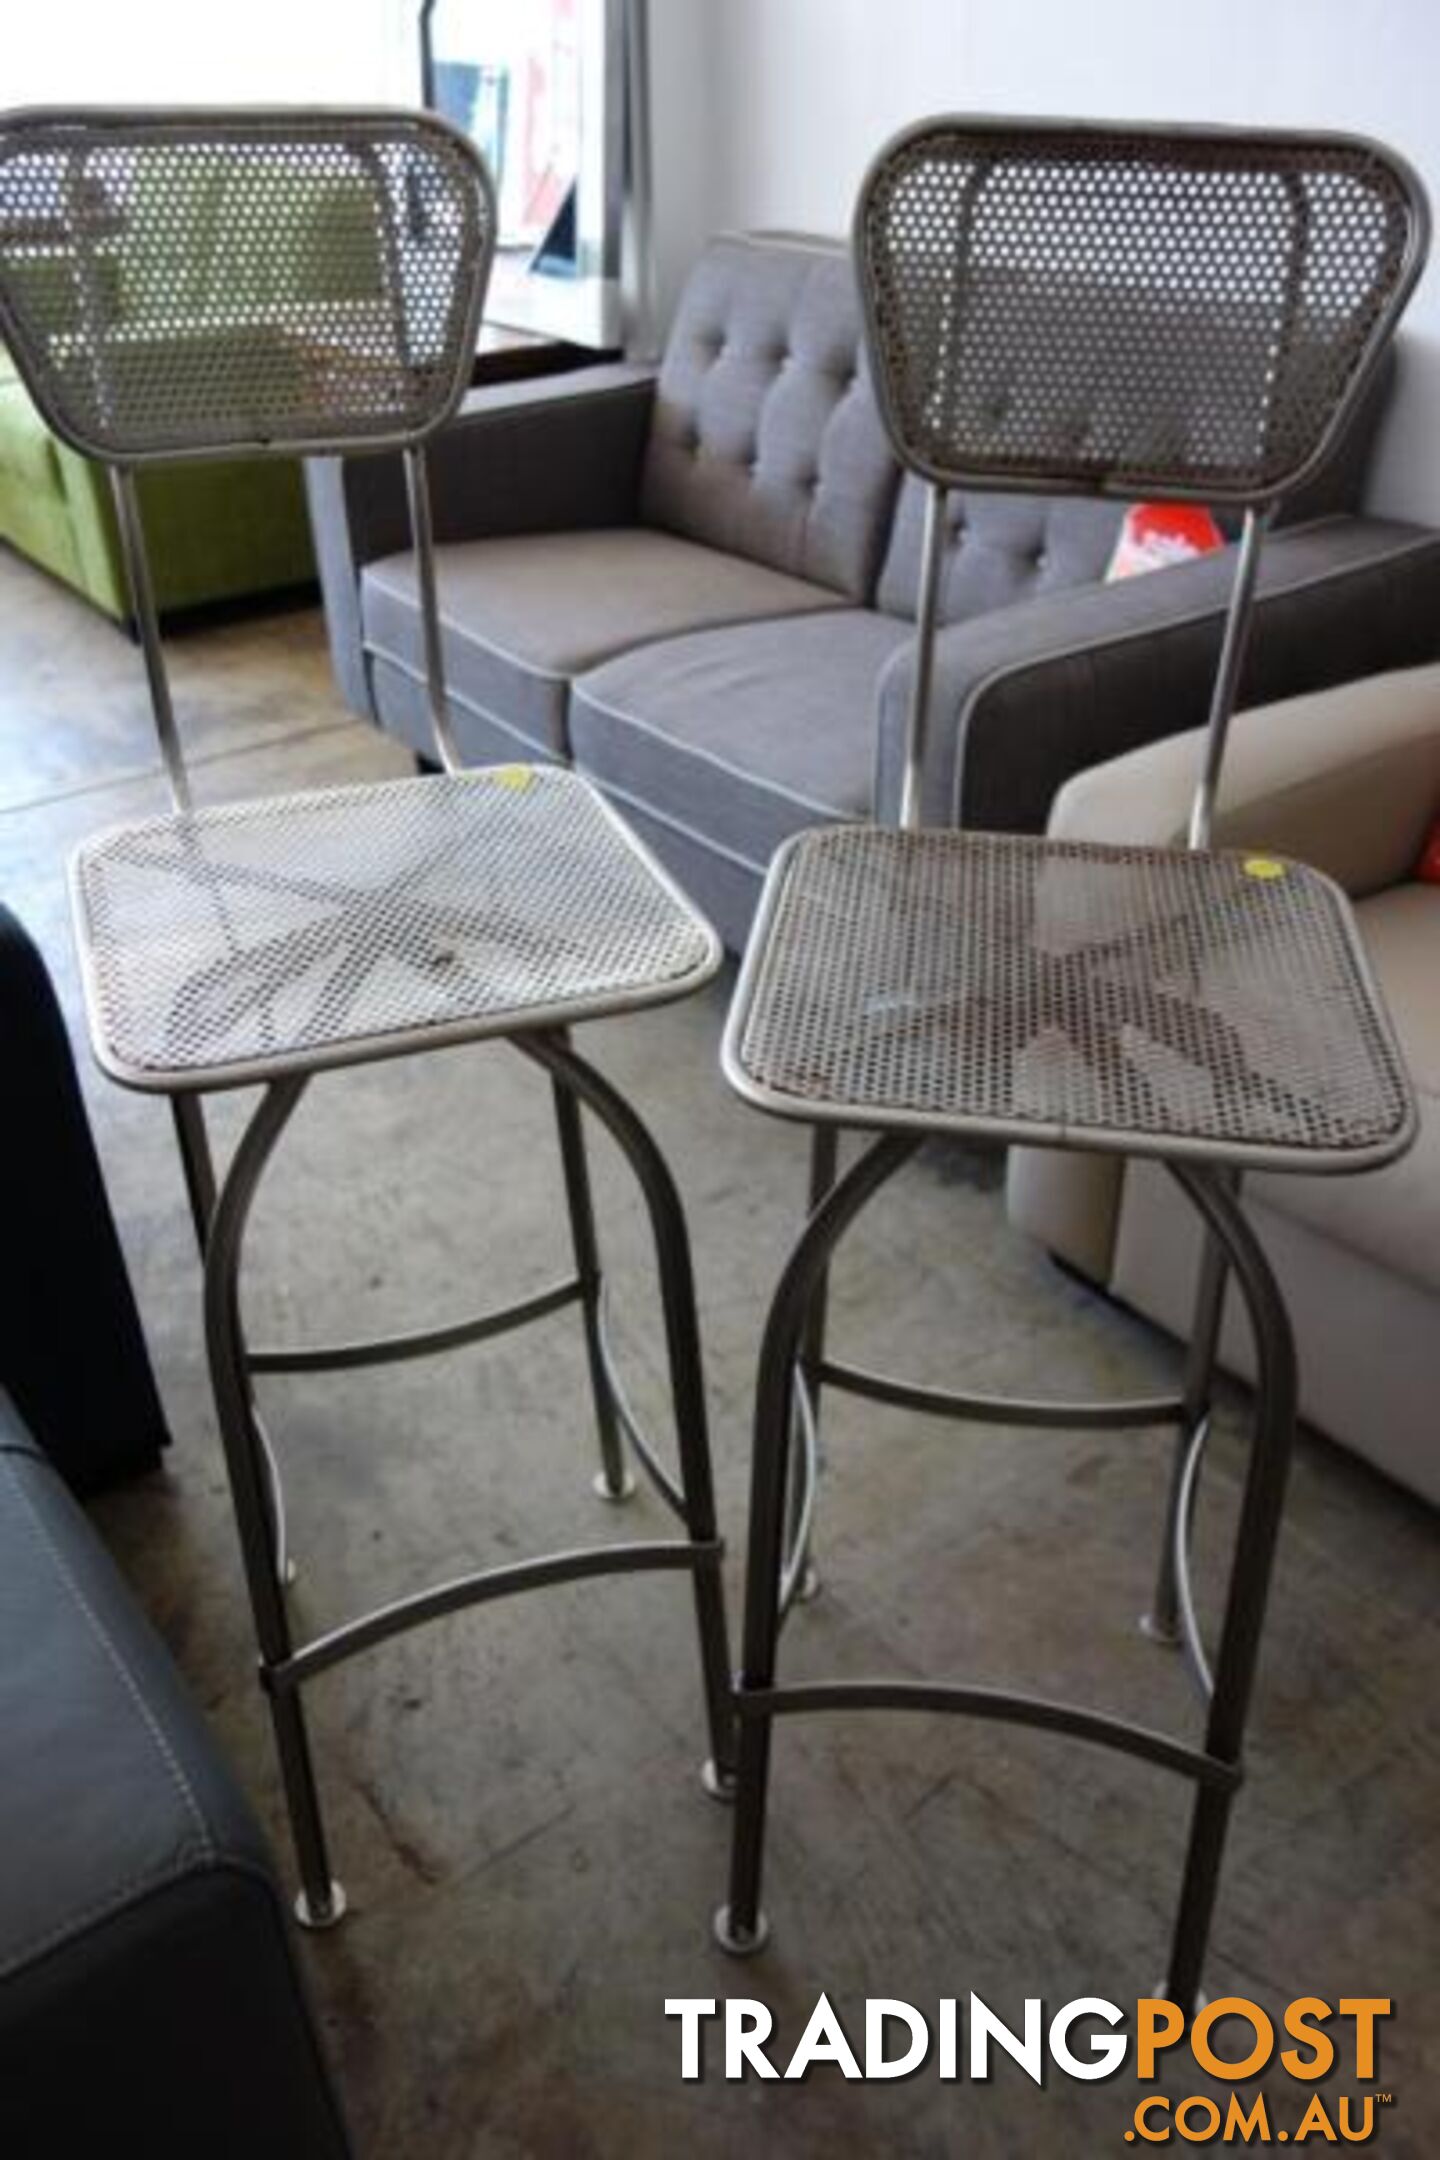 VINTAGE STOOL - - FURNITURE DISCOUNT WAREHOUSE. 50% - 80% OFF